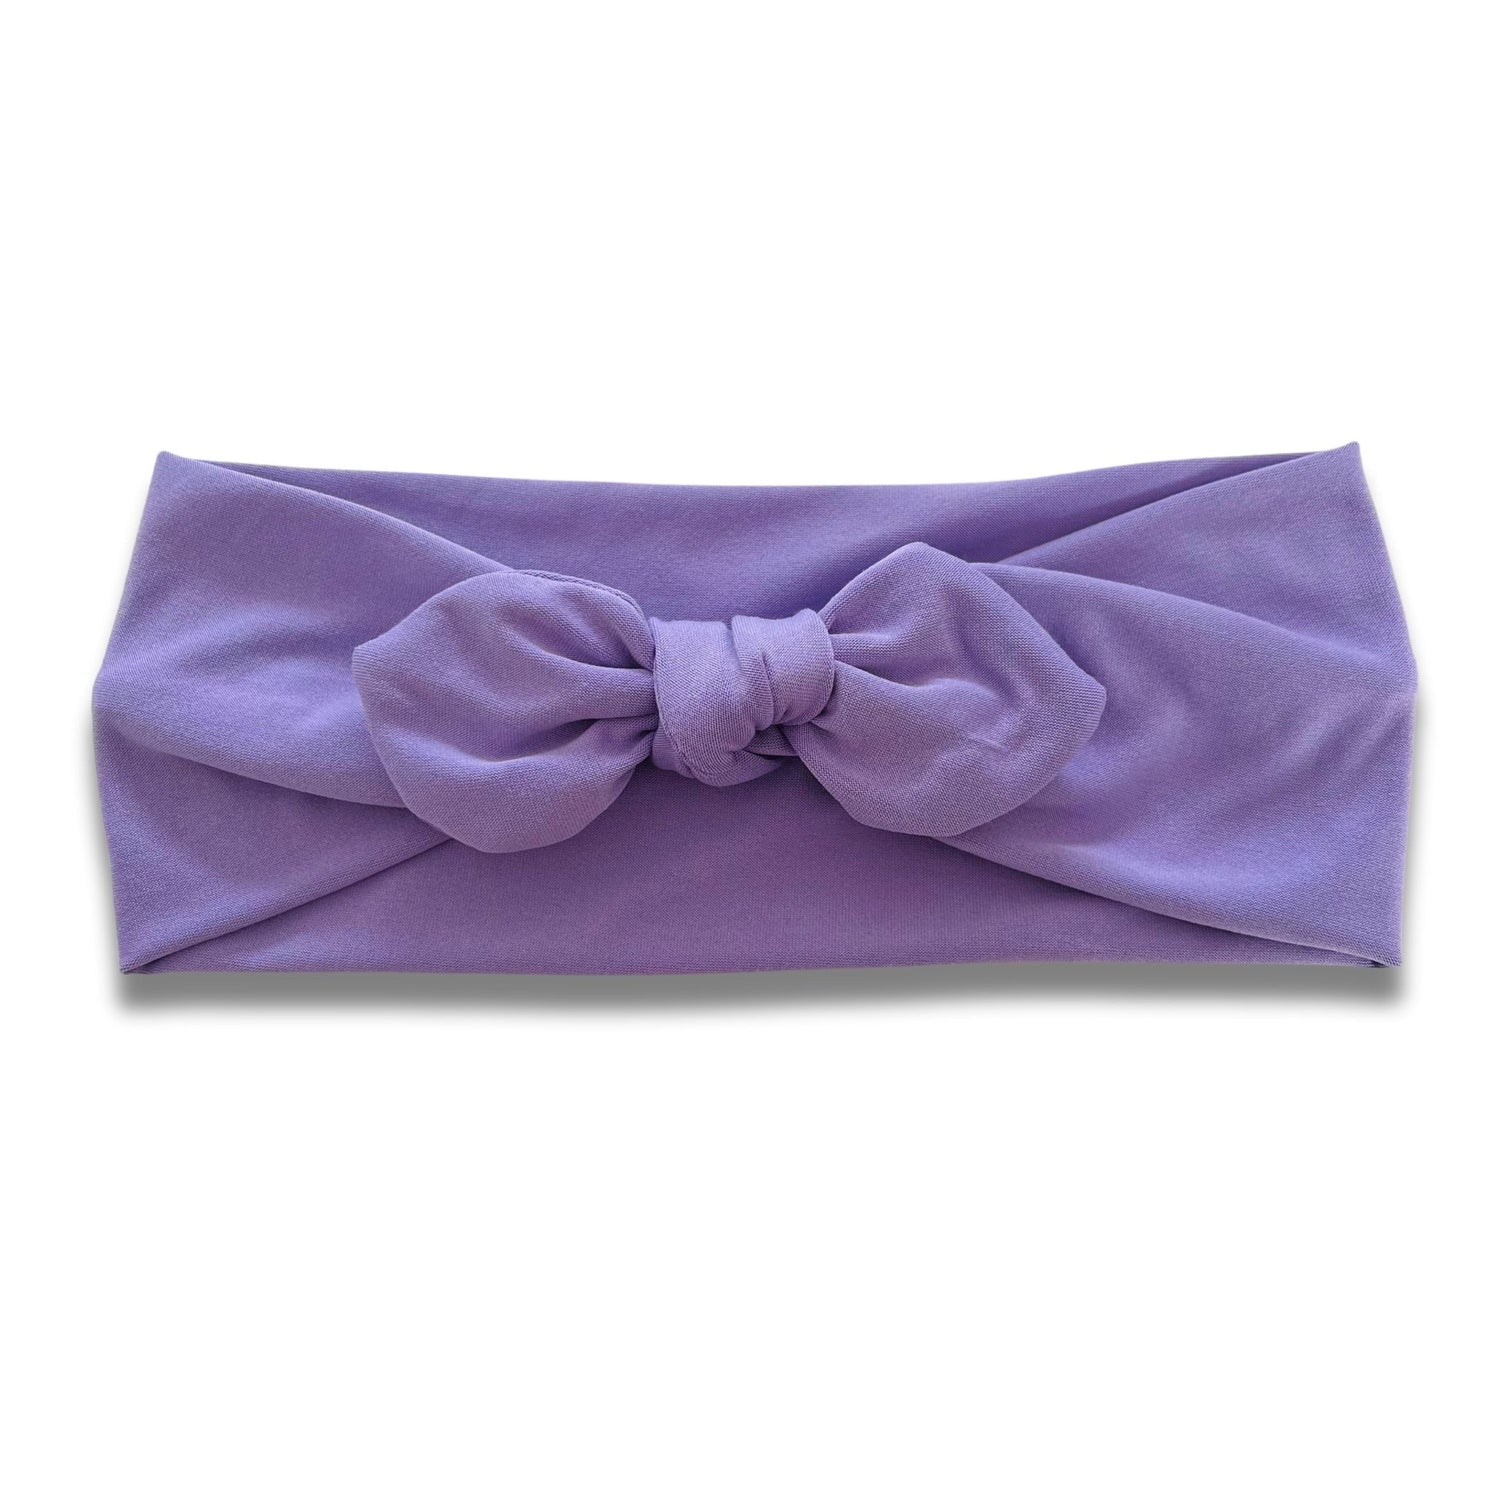 Lavender Sweetheart (or removable tie option)  Sewing Sweethearts Sweetheart with removable tie  